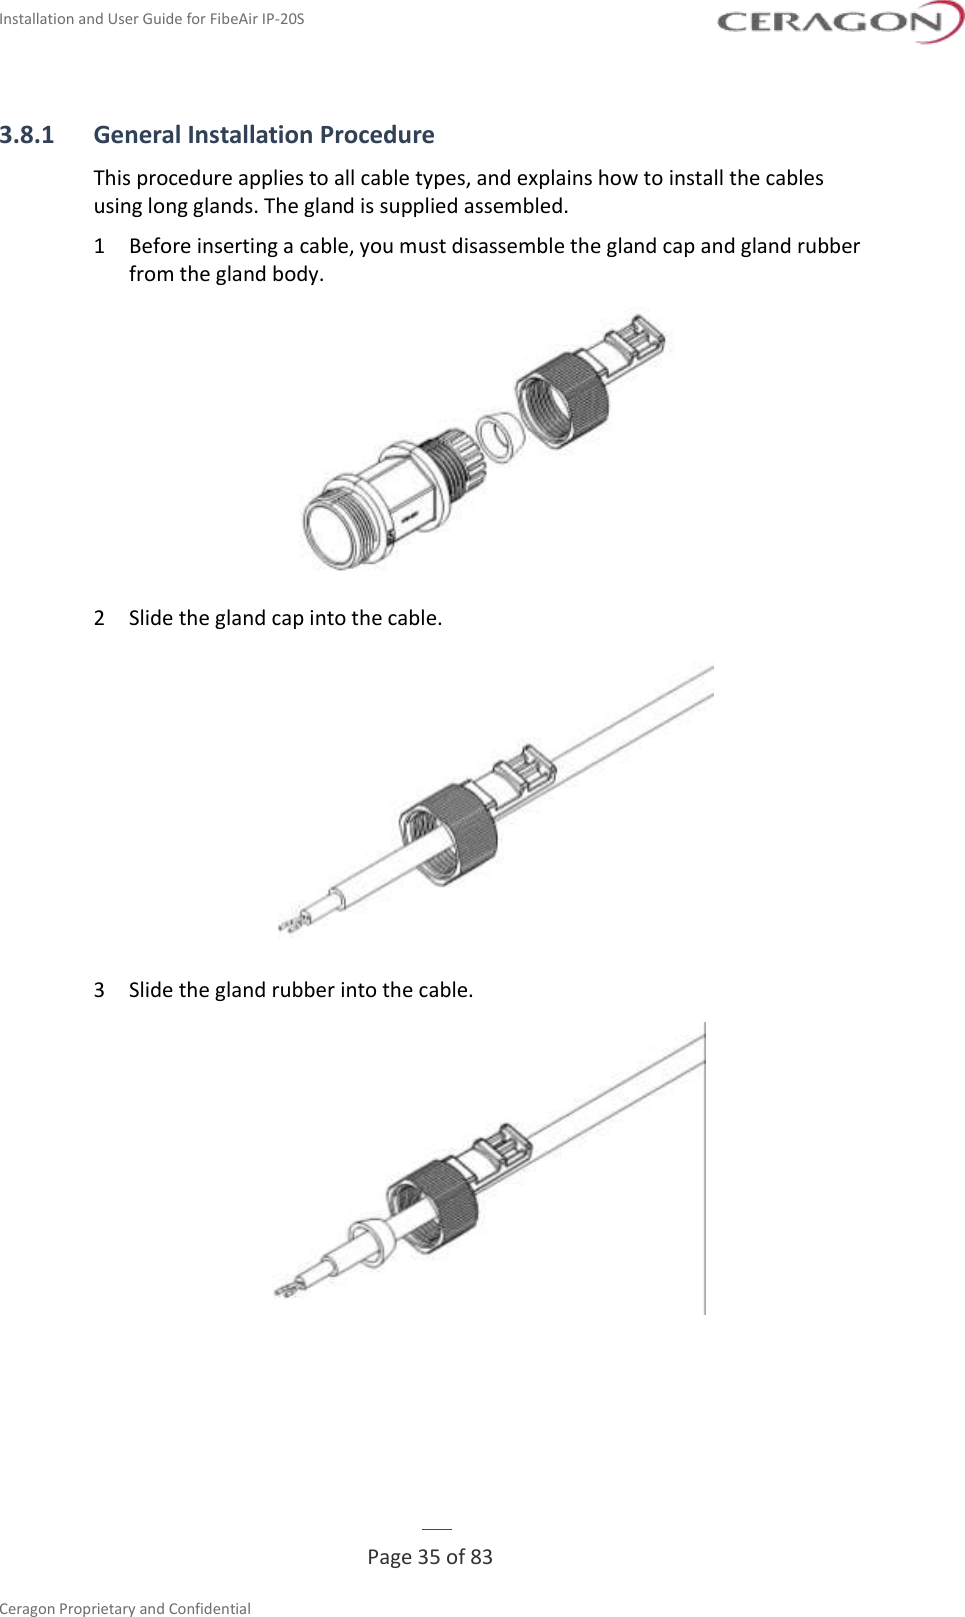 Installation and User Guide for FibeAir IP-20S   Page 35 of 83  Ceragon Proprietary and Confidential     3.8.1 General Installation Procedure This procedure applies to all cable types, and explains how to install the cables using long glands. The gland is supplied assembled. 1  Before inserting a cable, you must disassemble the gland cap and gland rubber from the gland body.  2  Slide the gland cap into the cable.  3  Slide the gland rubber into the cable.  